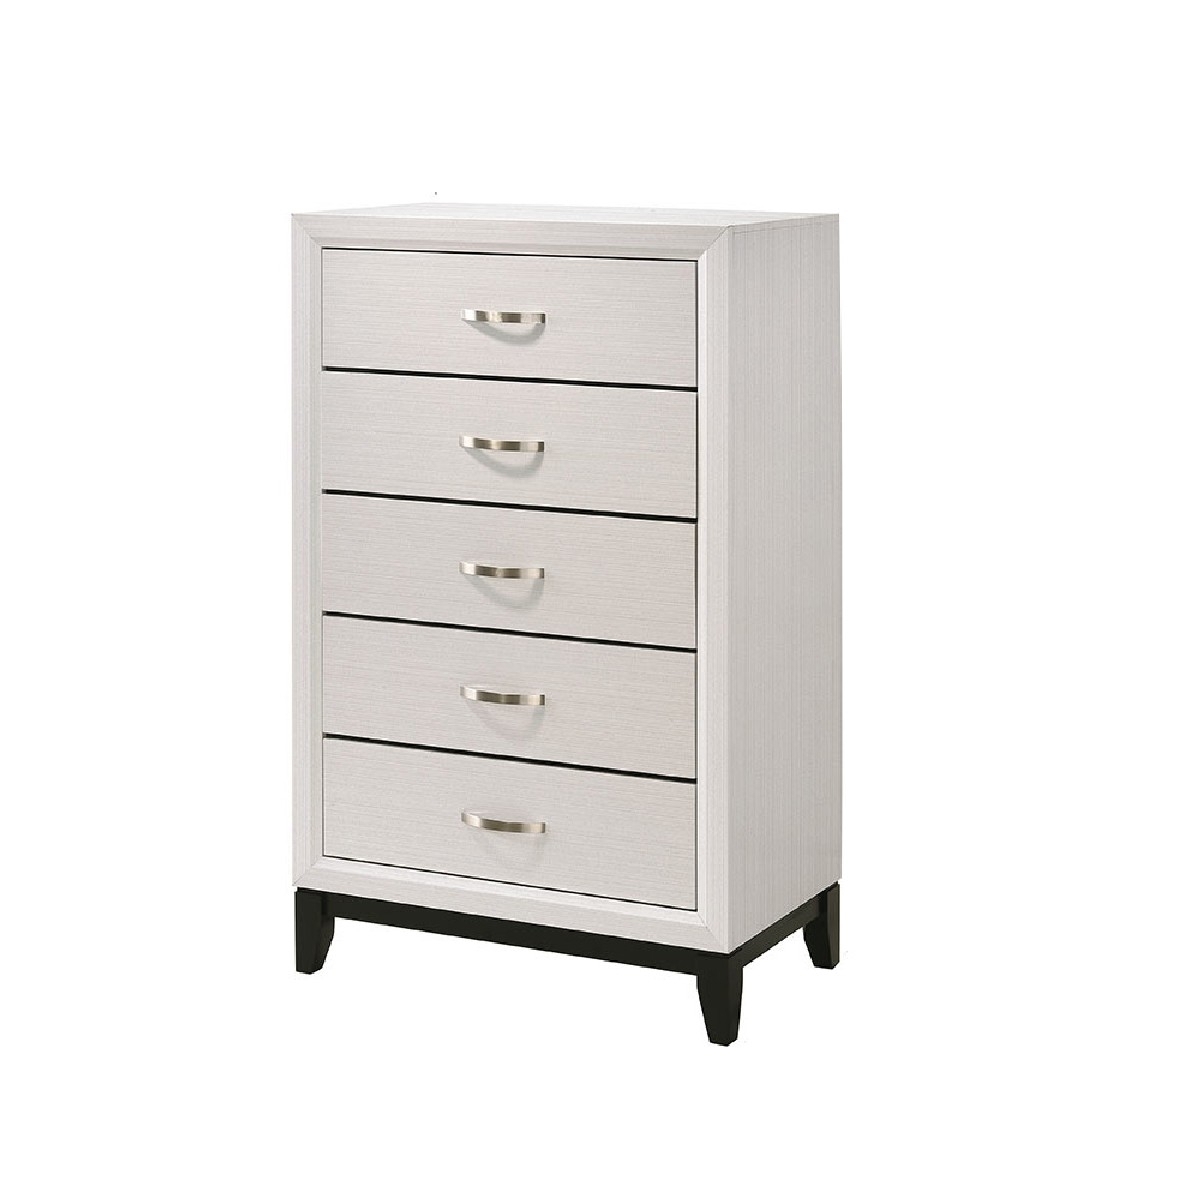 Transitional 5 Drawer Chest With Curved Handle And Chamfered Feet, White- Saltoro Sherpi